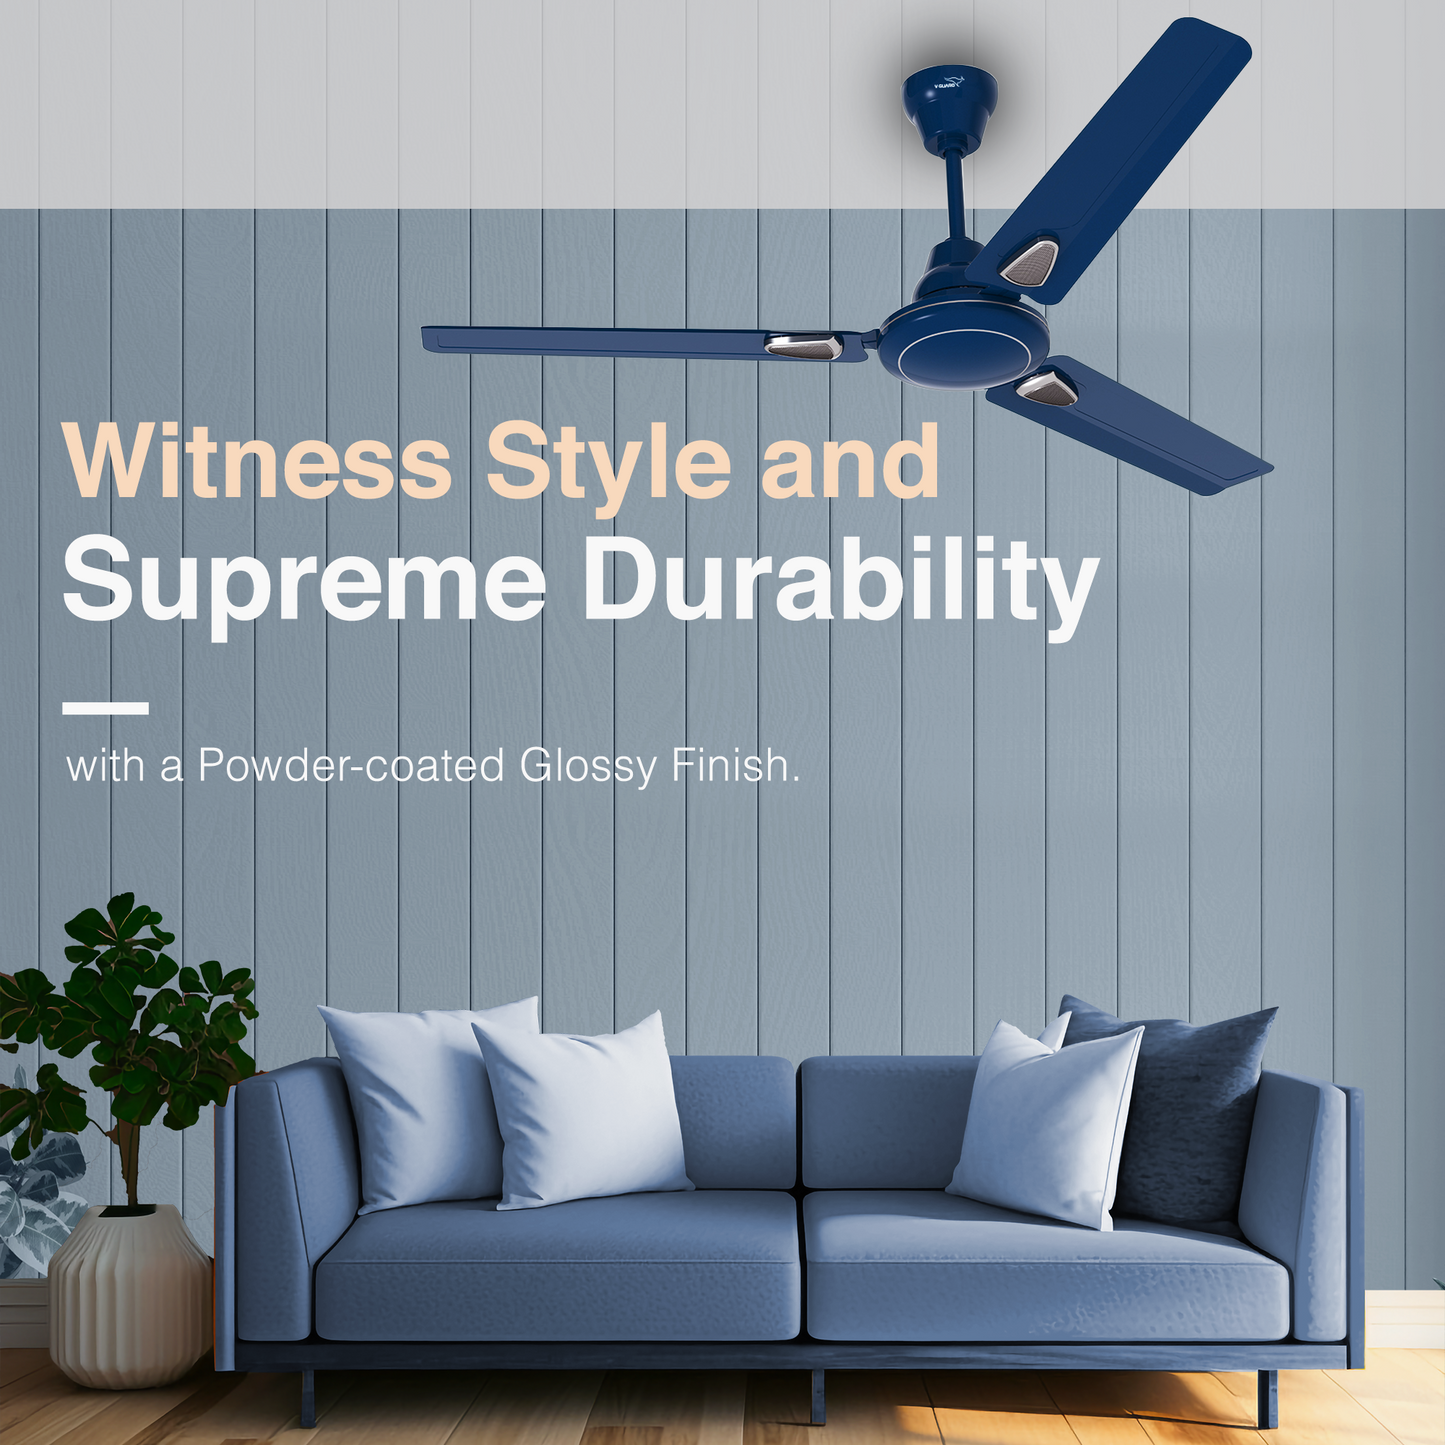 Windle Deco AS Designer Ceiling Fan for Home 1.2 m, Admiral Blue